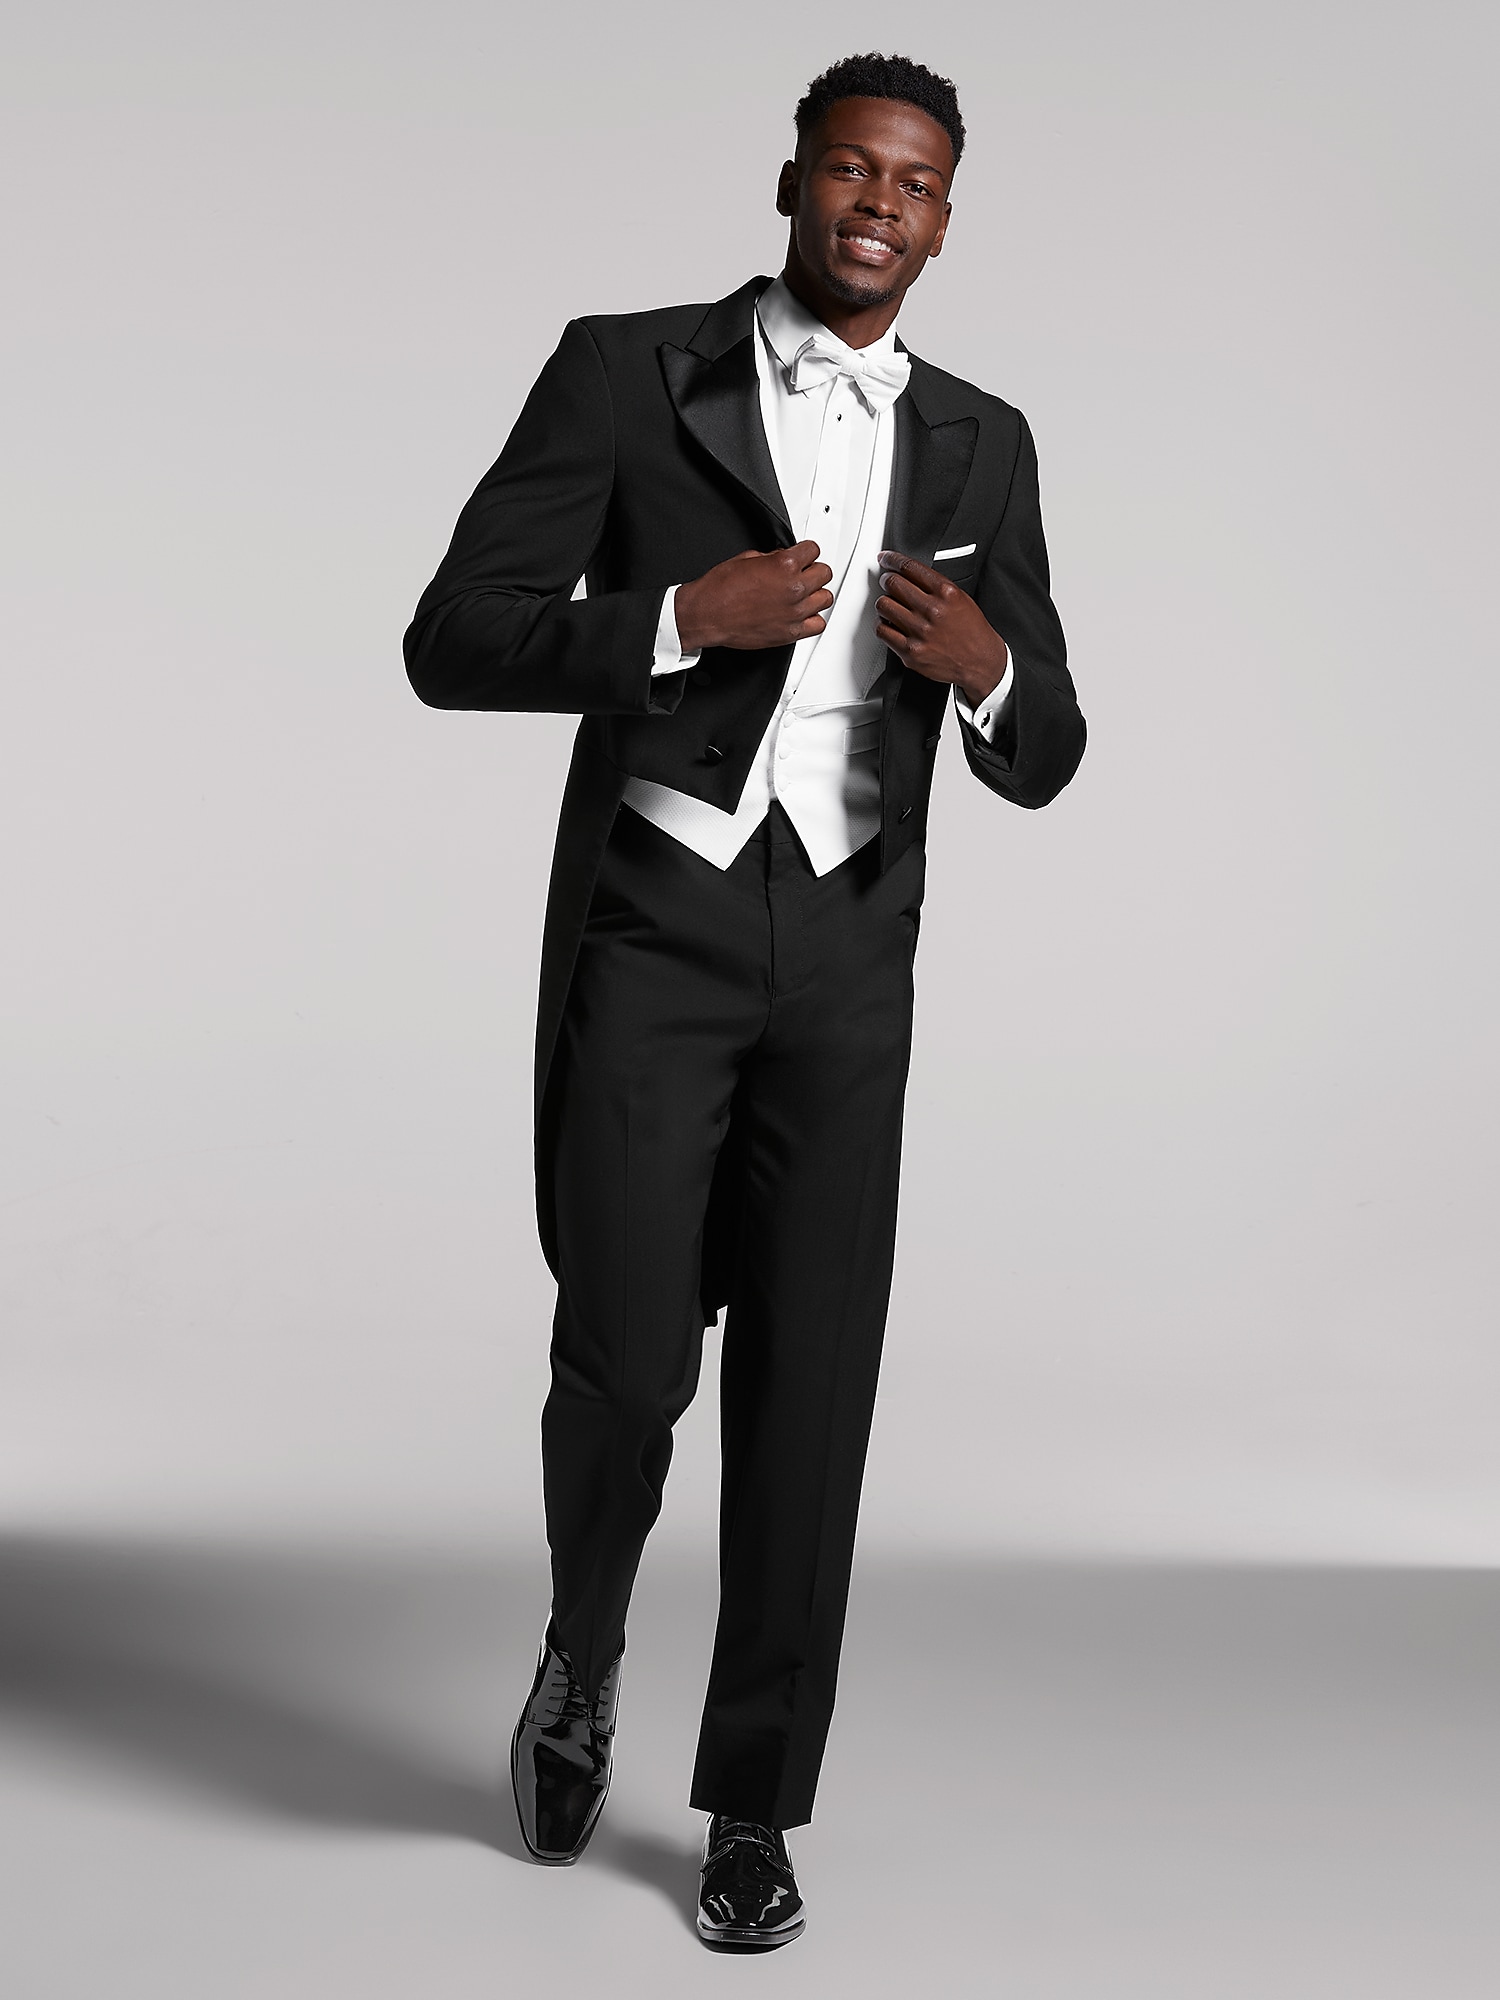 top tuxedo rental houston - Be Such A Good Blook Photogallery